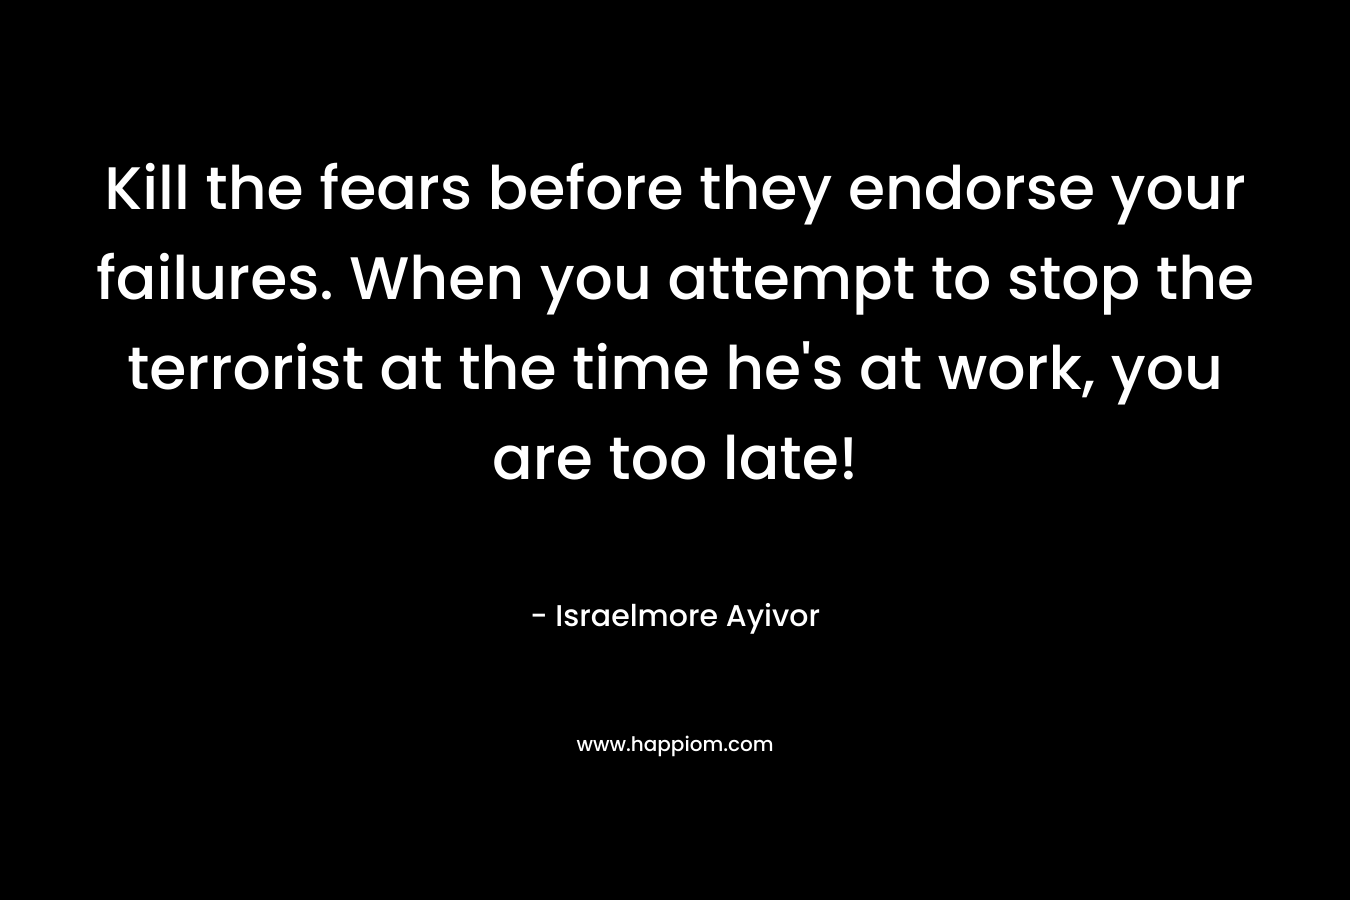 Kill the fears before they endorse your failures. When you attempt to stop the terrorist at the time he's at work, you are too late!